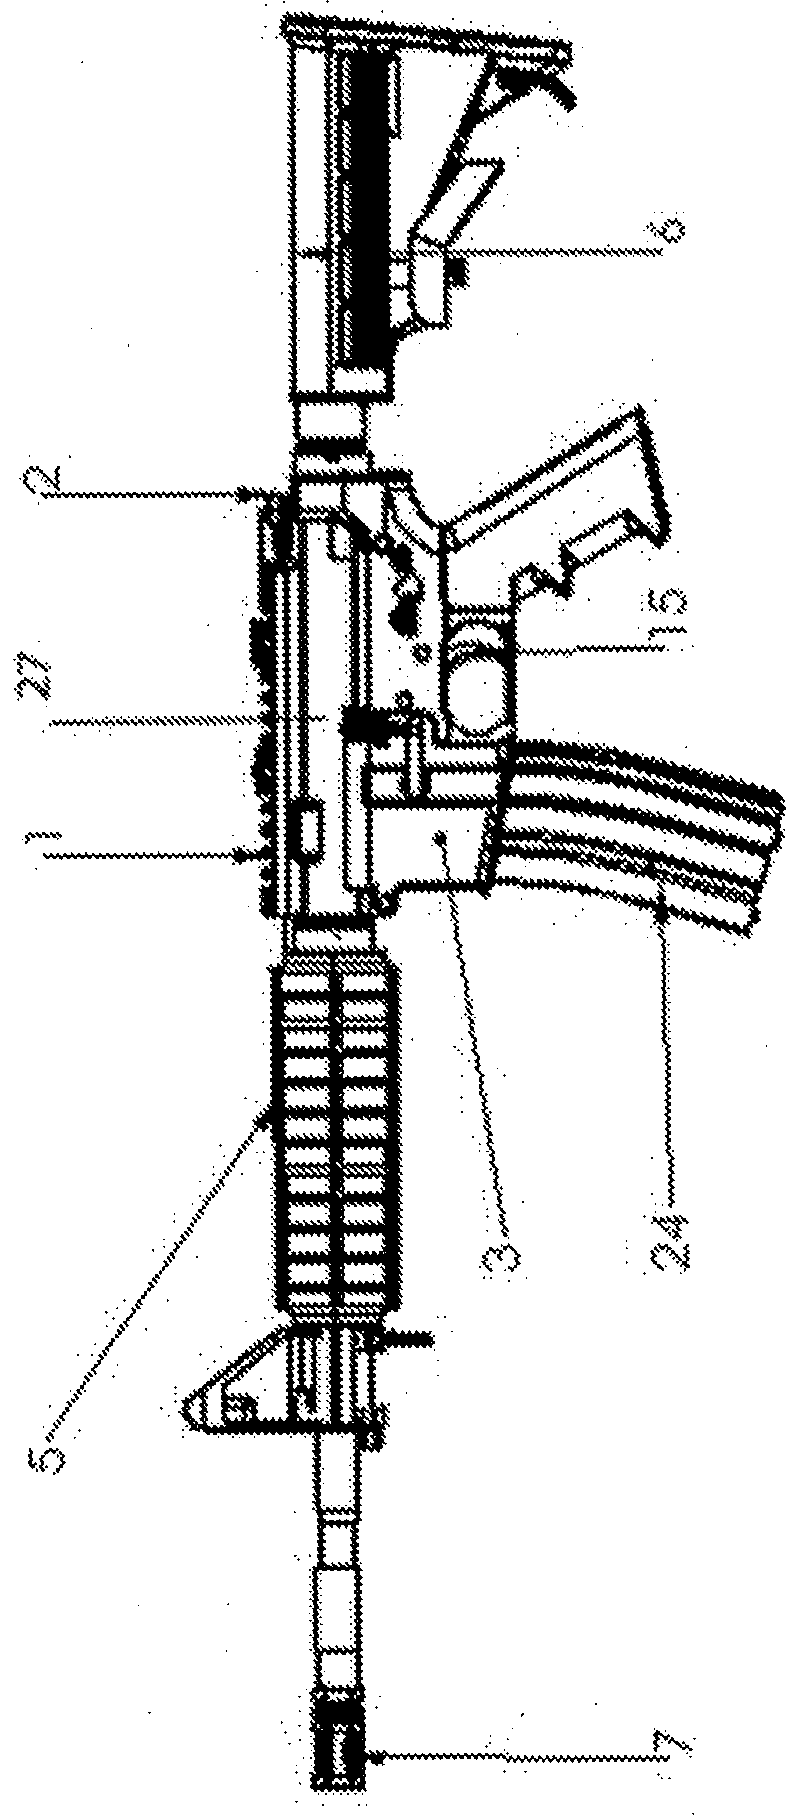 Electronic simulation device for weapon